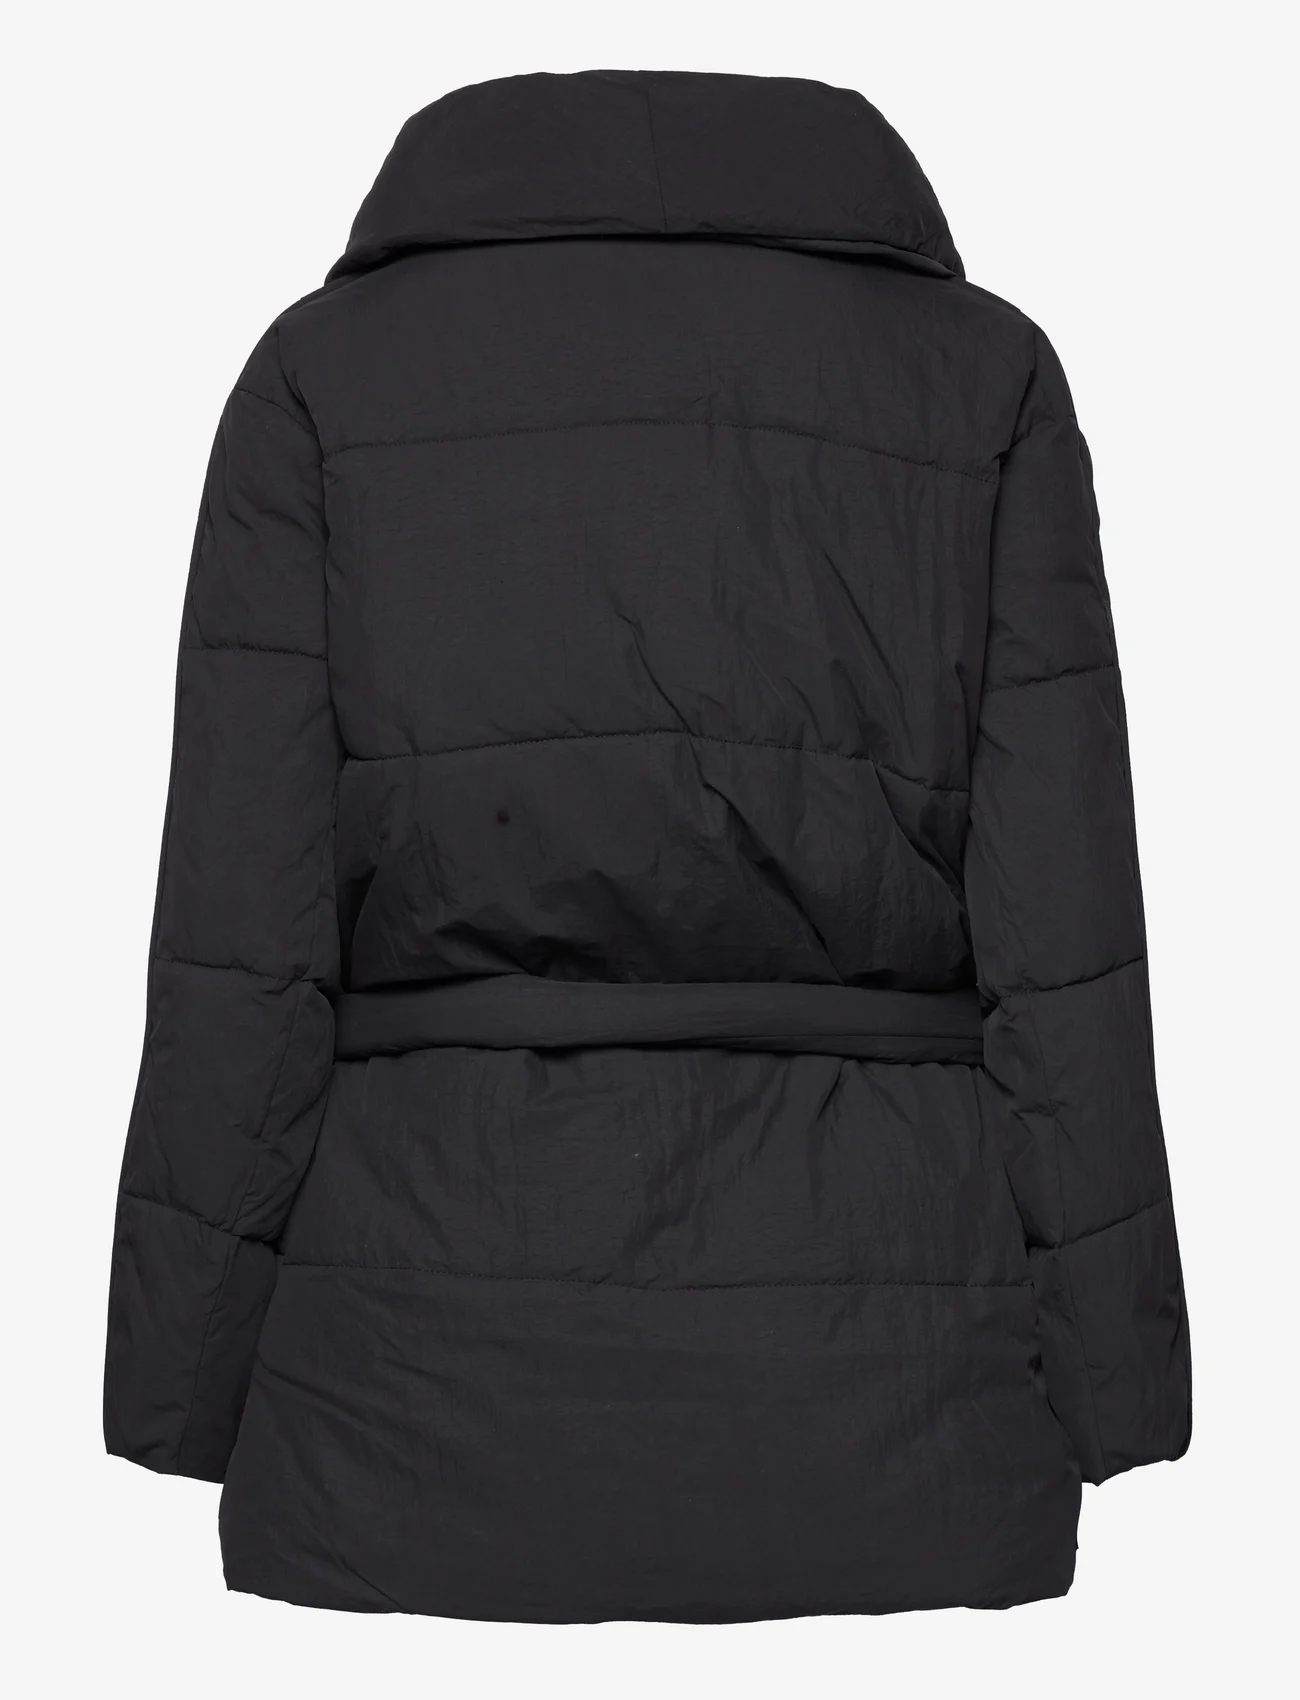 Esprit Casual - Quilted puffer jacket with belt - winter jacket - black - 1